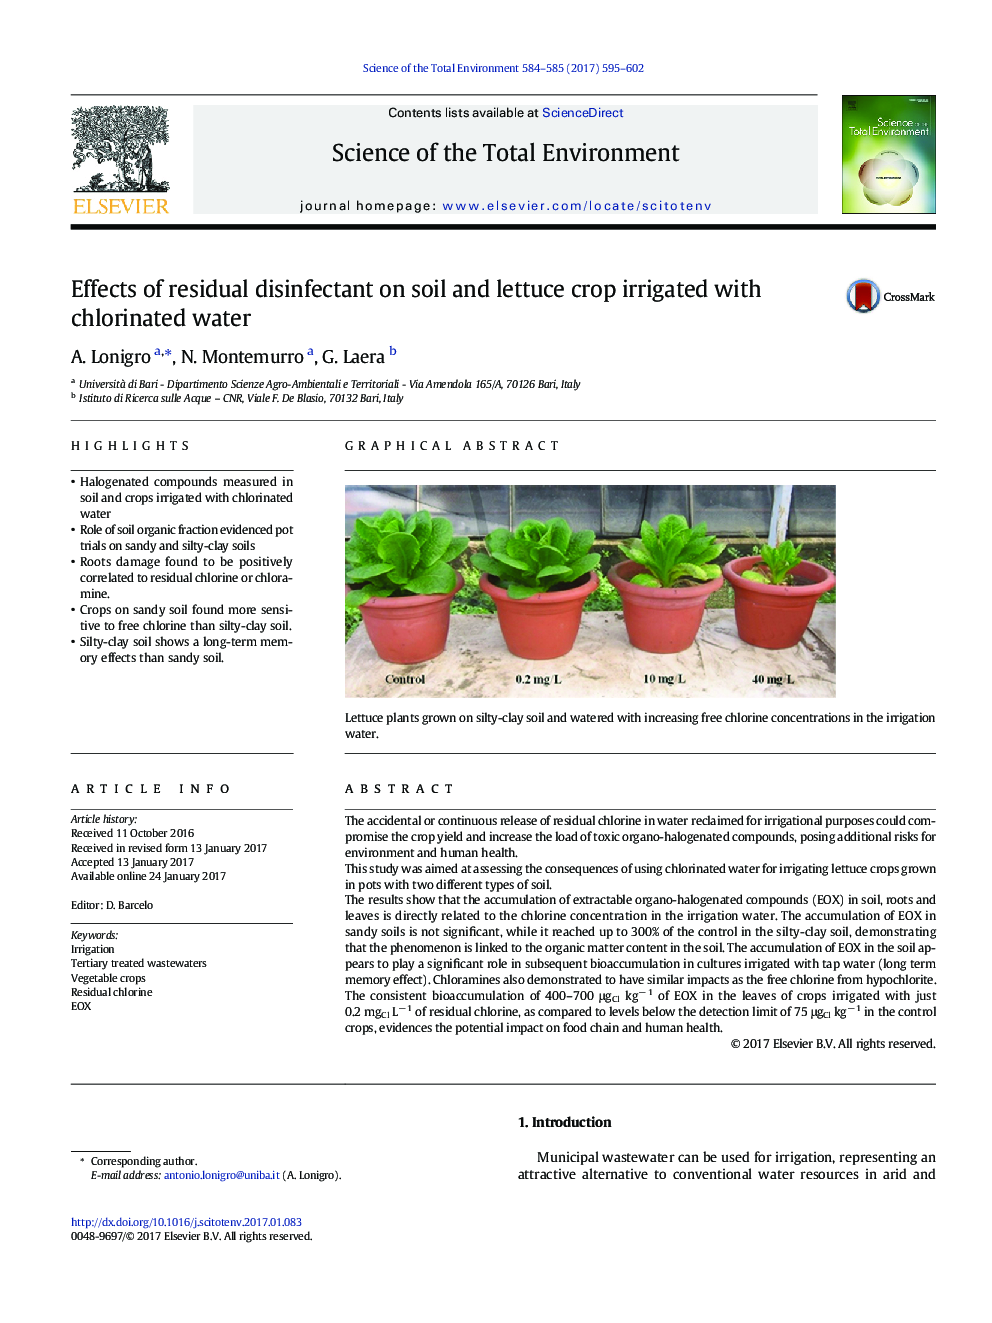 Effects of residual disinfectant on soil and lettuce crop irrigated with chlorinated water